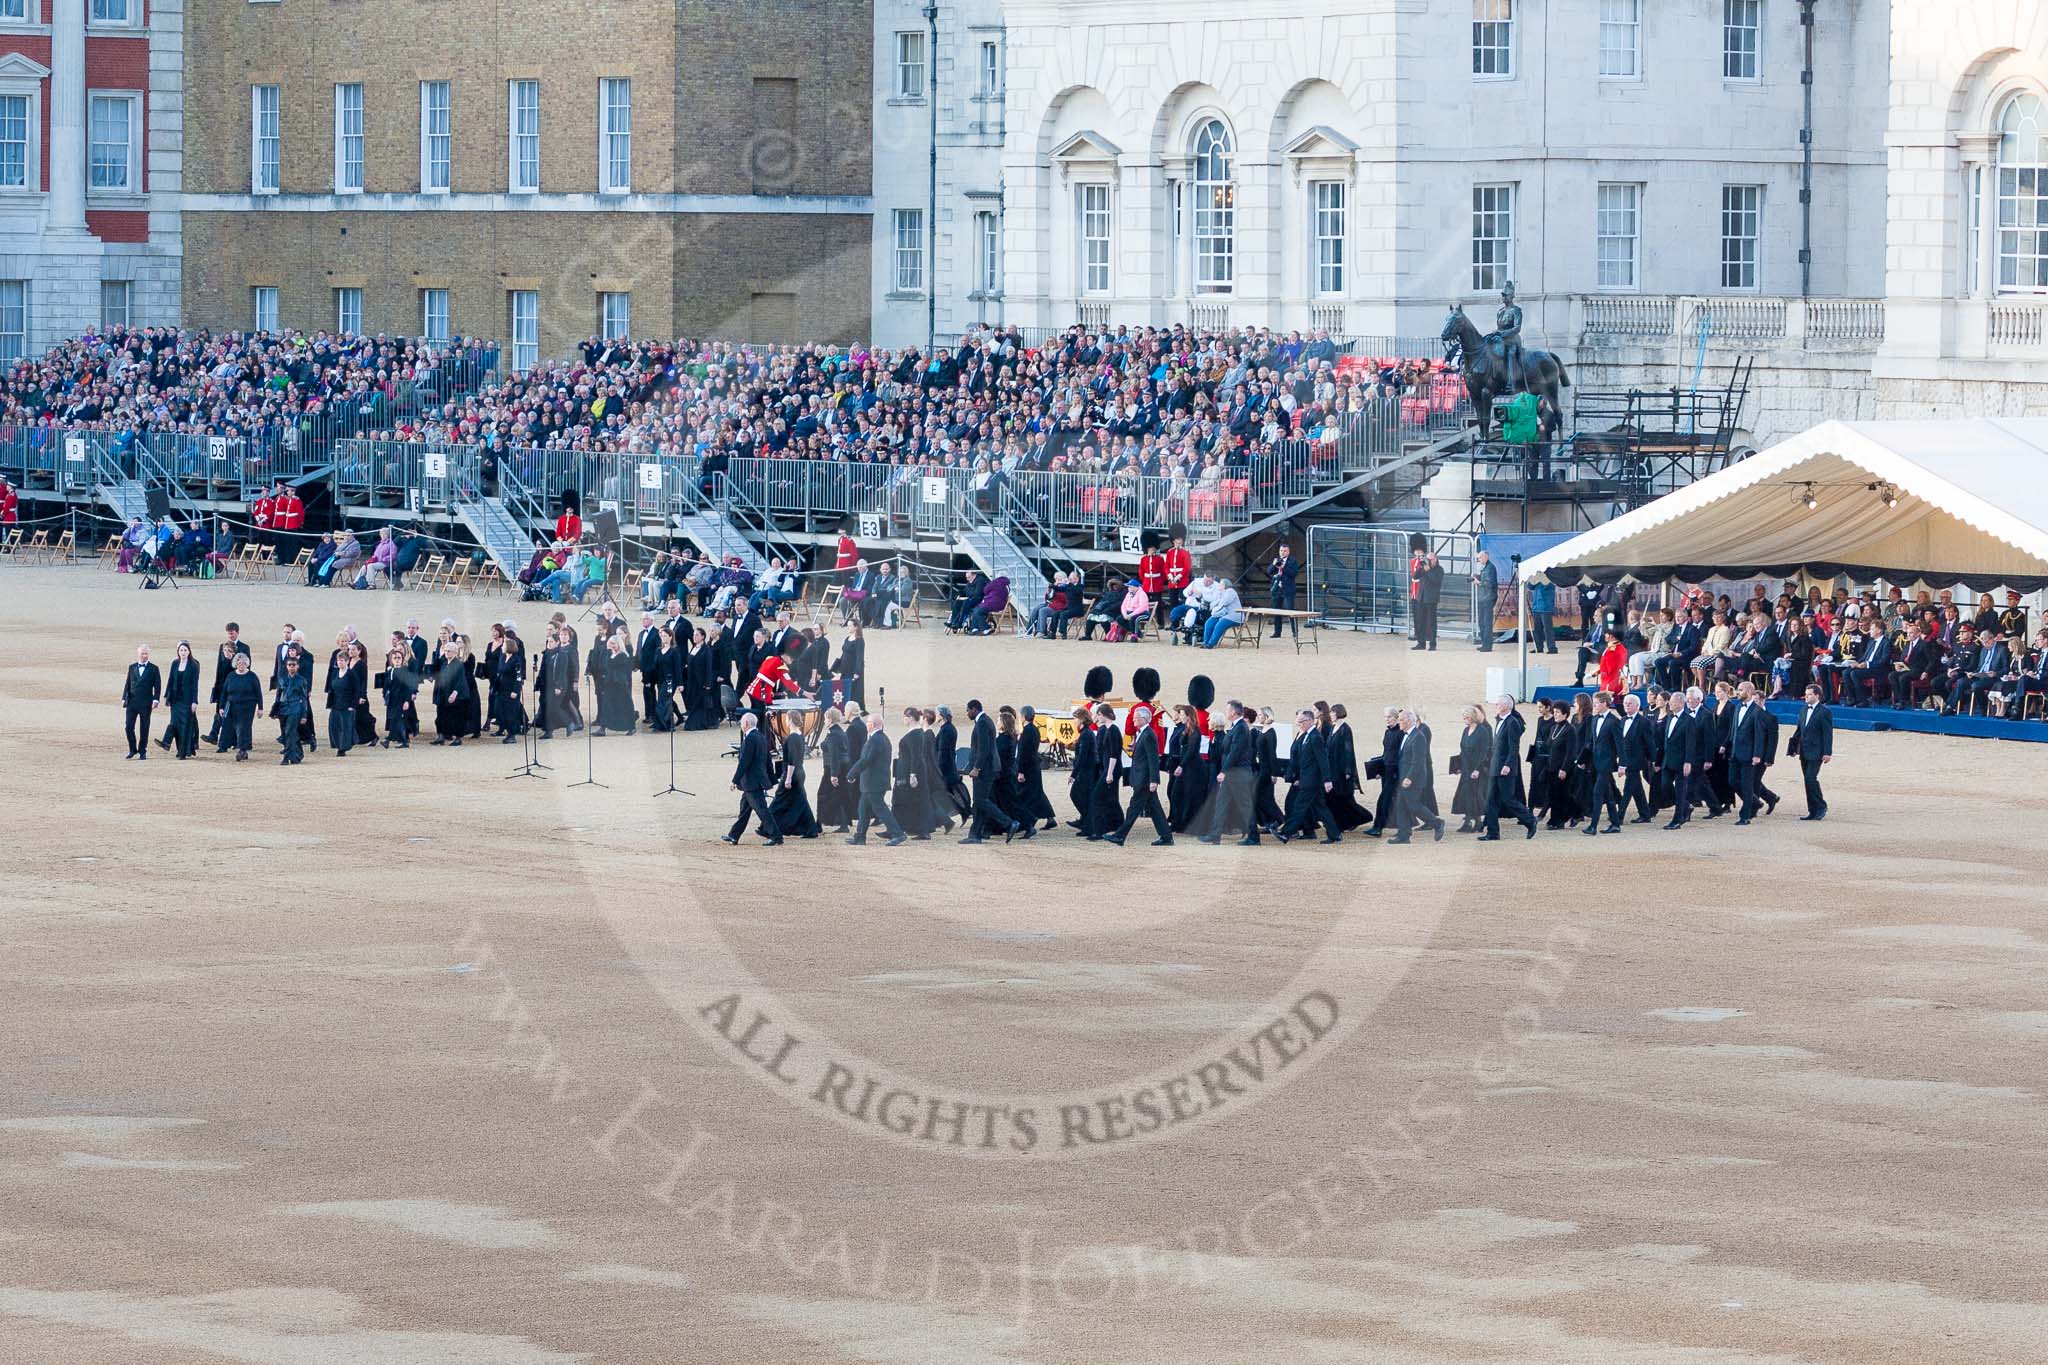 Beating Retreat 2015 - Waterloo 200.
Horse Guards Parade, Westminster,
London,

United Kingdom,
on 10 June 2015 at 20:32, image #119